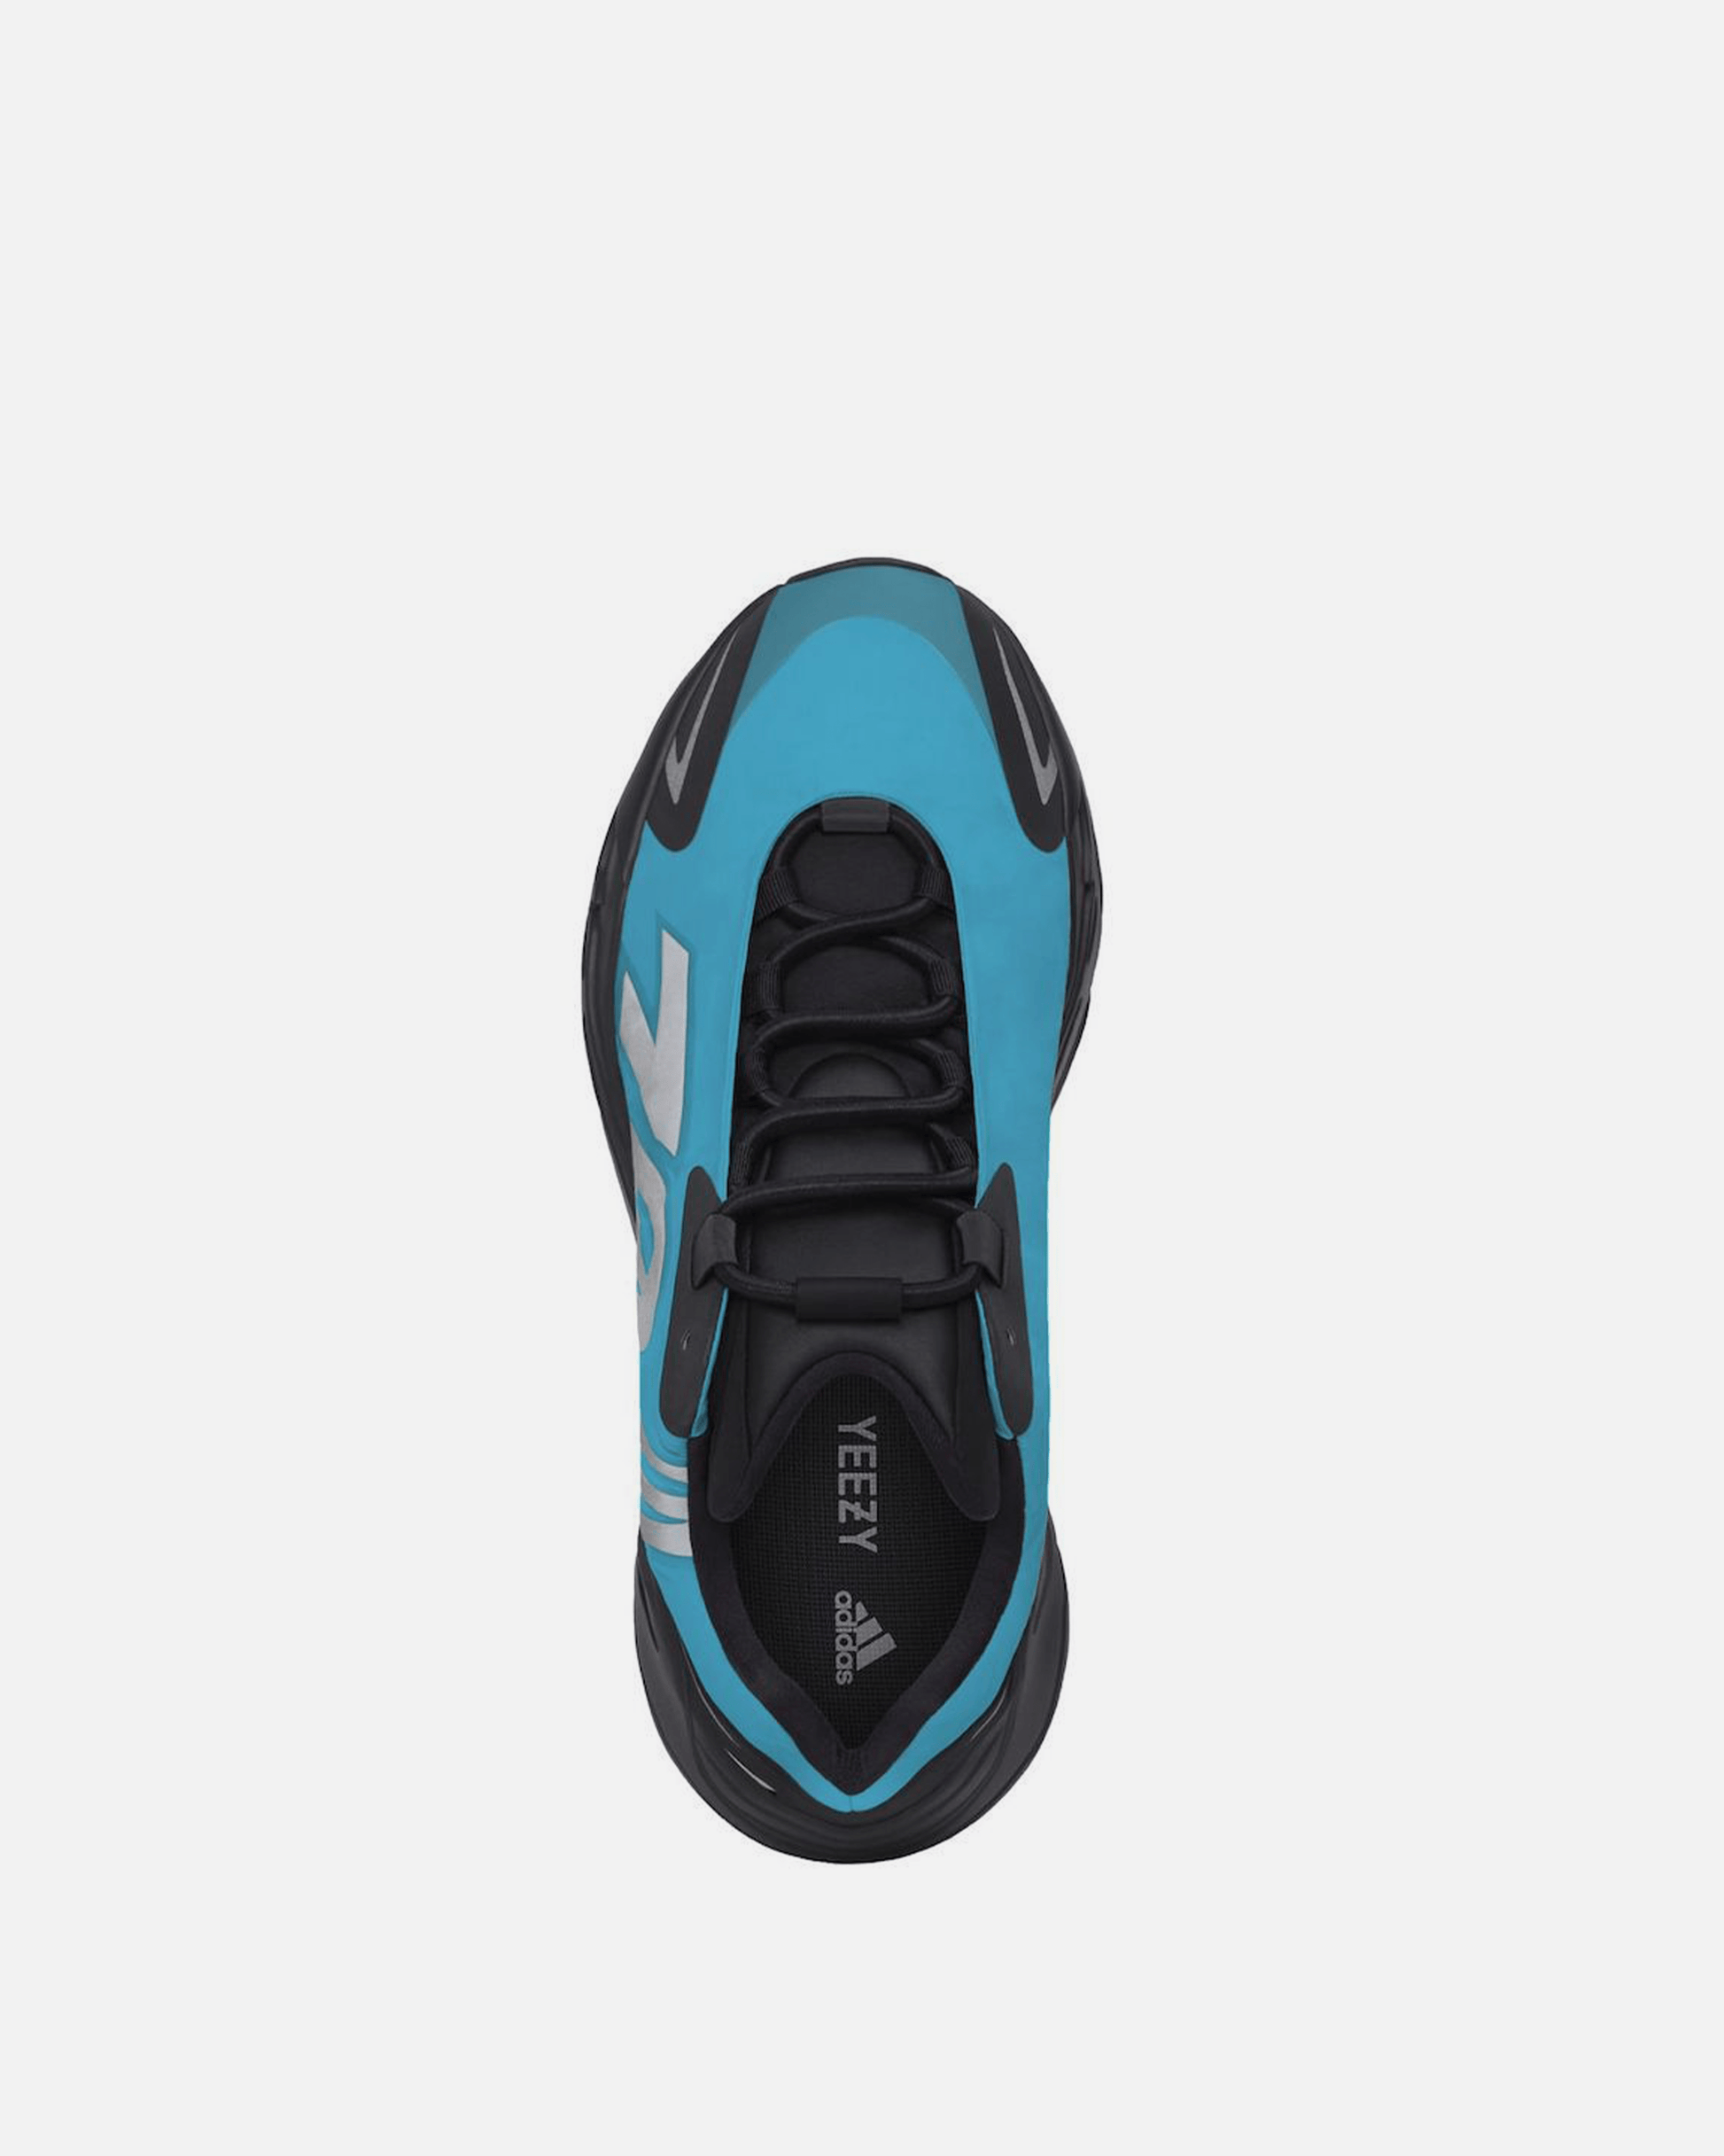 Adidas Releases Yeezy Boost 700 MNVN 'Bright Cyan'